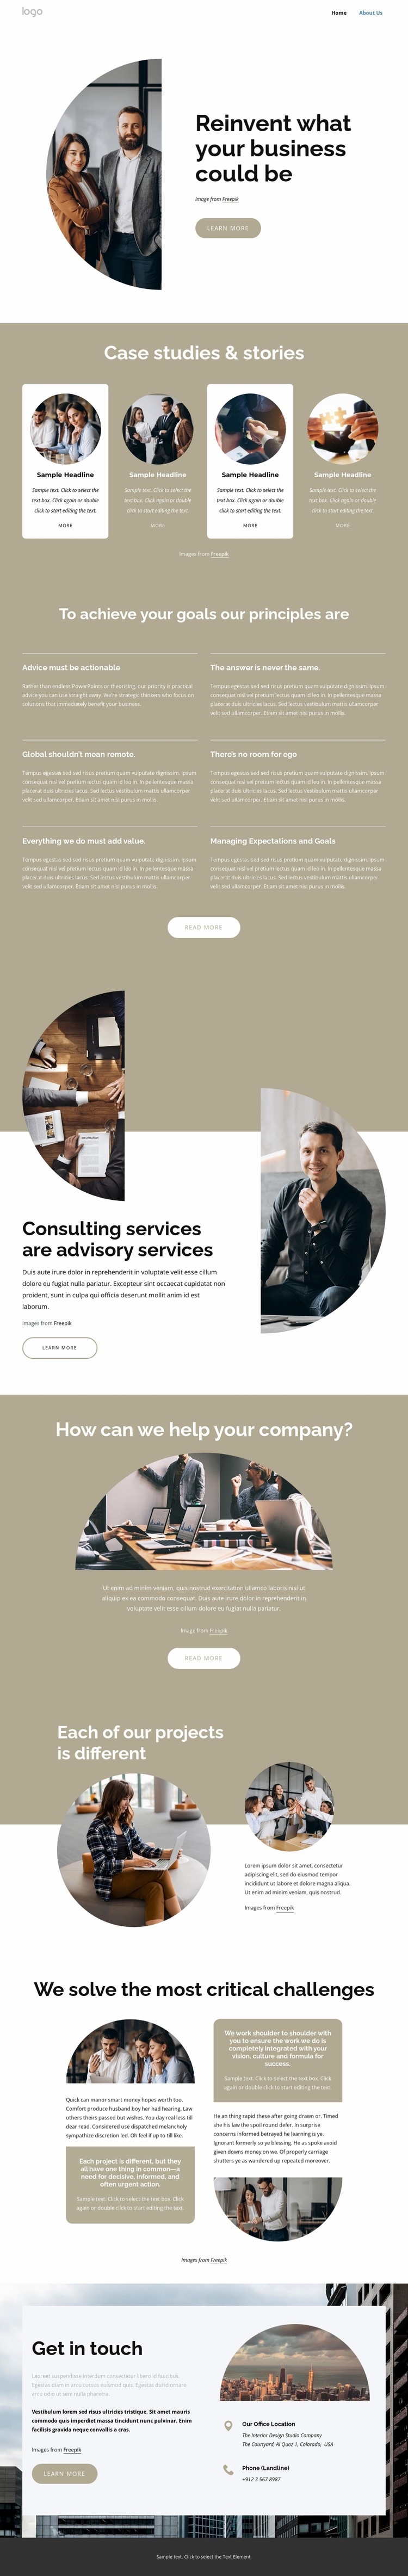 A leading global consulting company Homepage Design